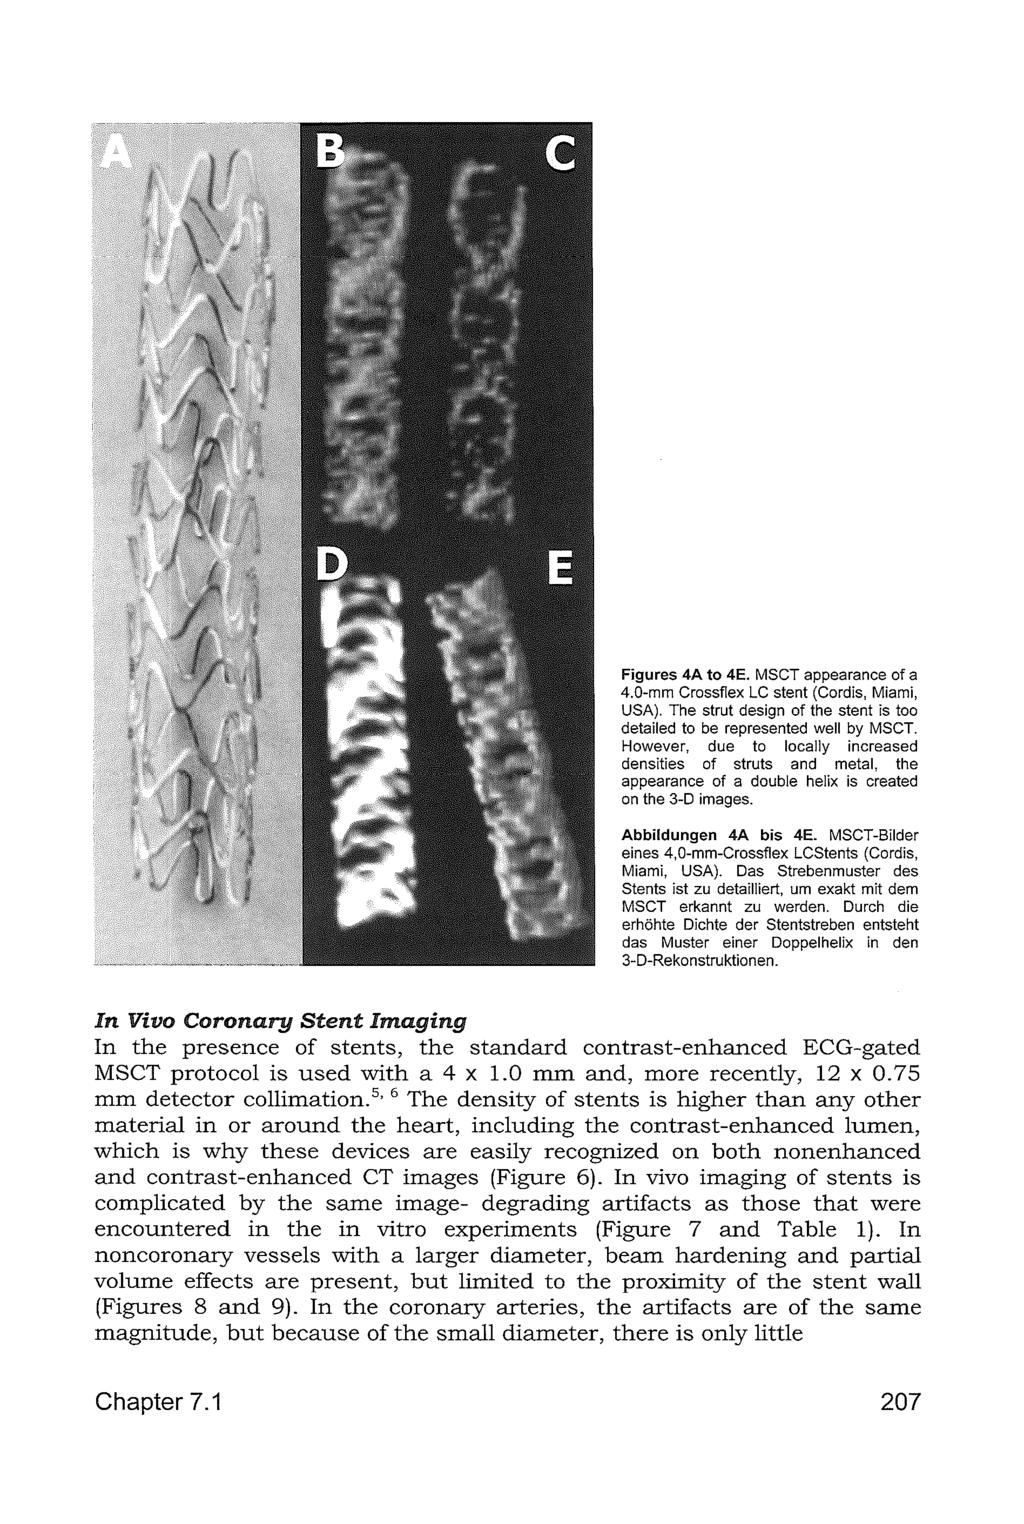 Figures 4A to 4E. MSCT appearance of a 4.0-mm Crossflex LC stent (Cordis, Miami, USA). The strut design of the stent is too detailed to be represented well by MSCT.